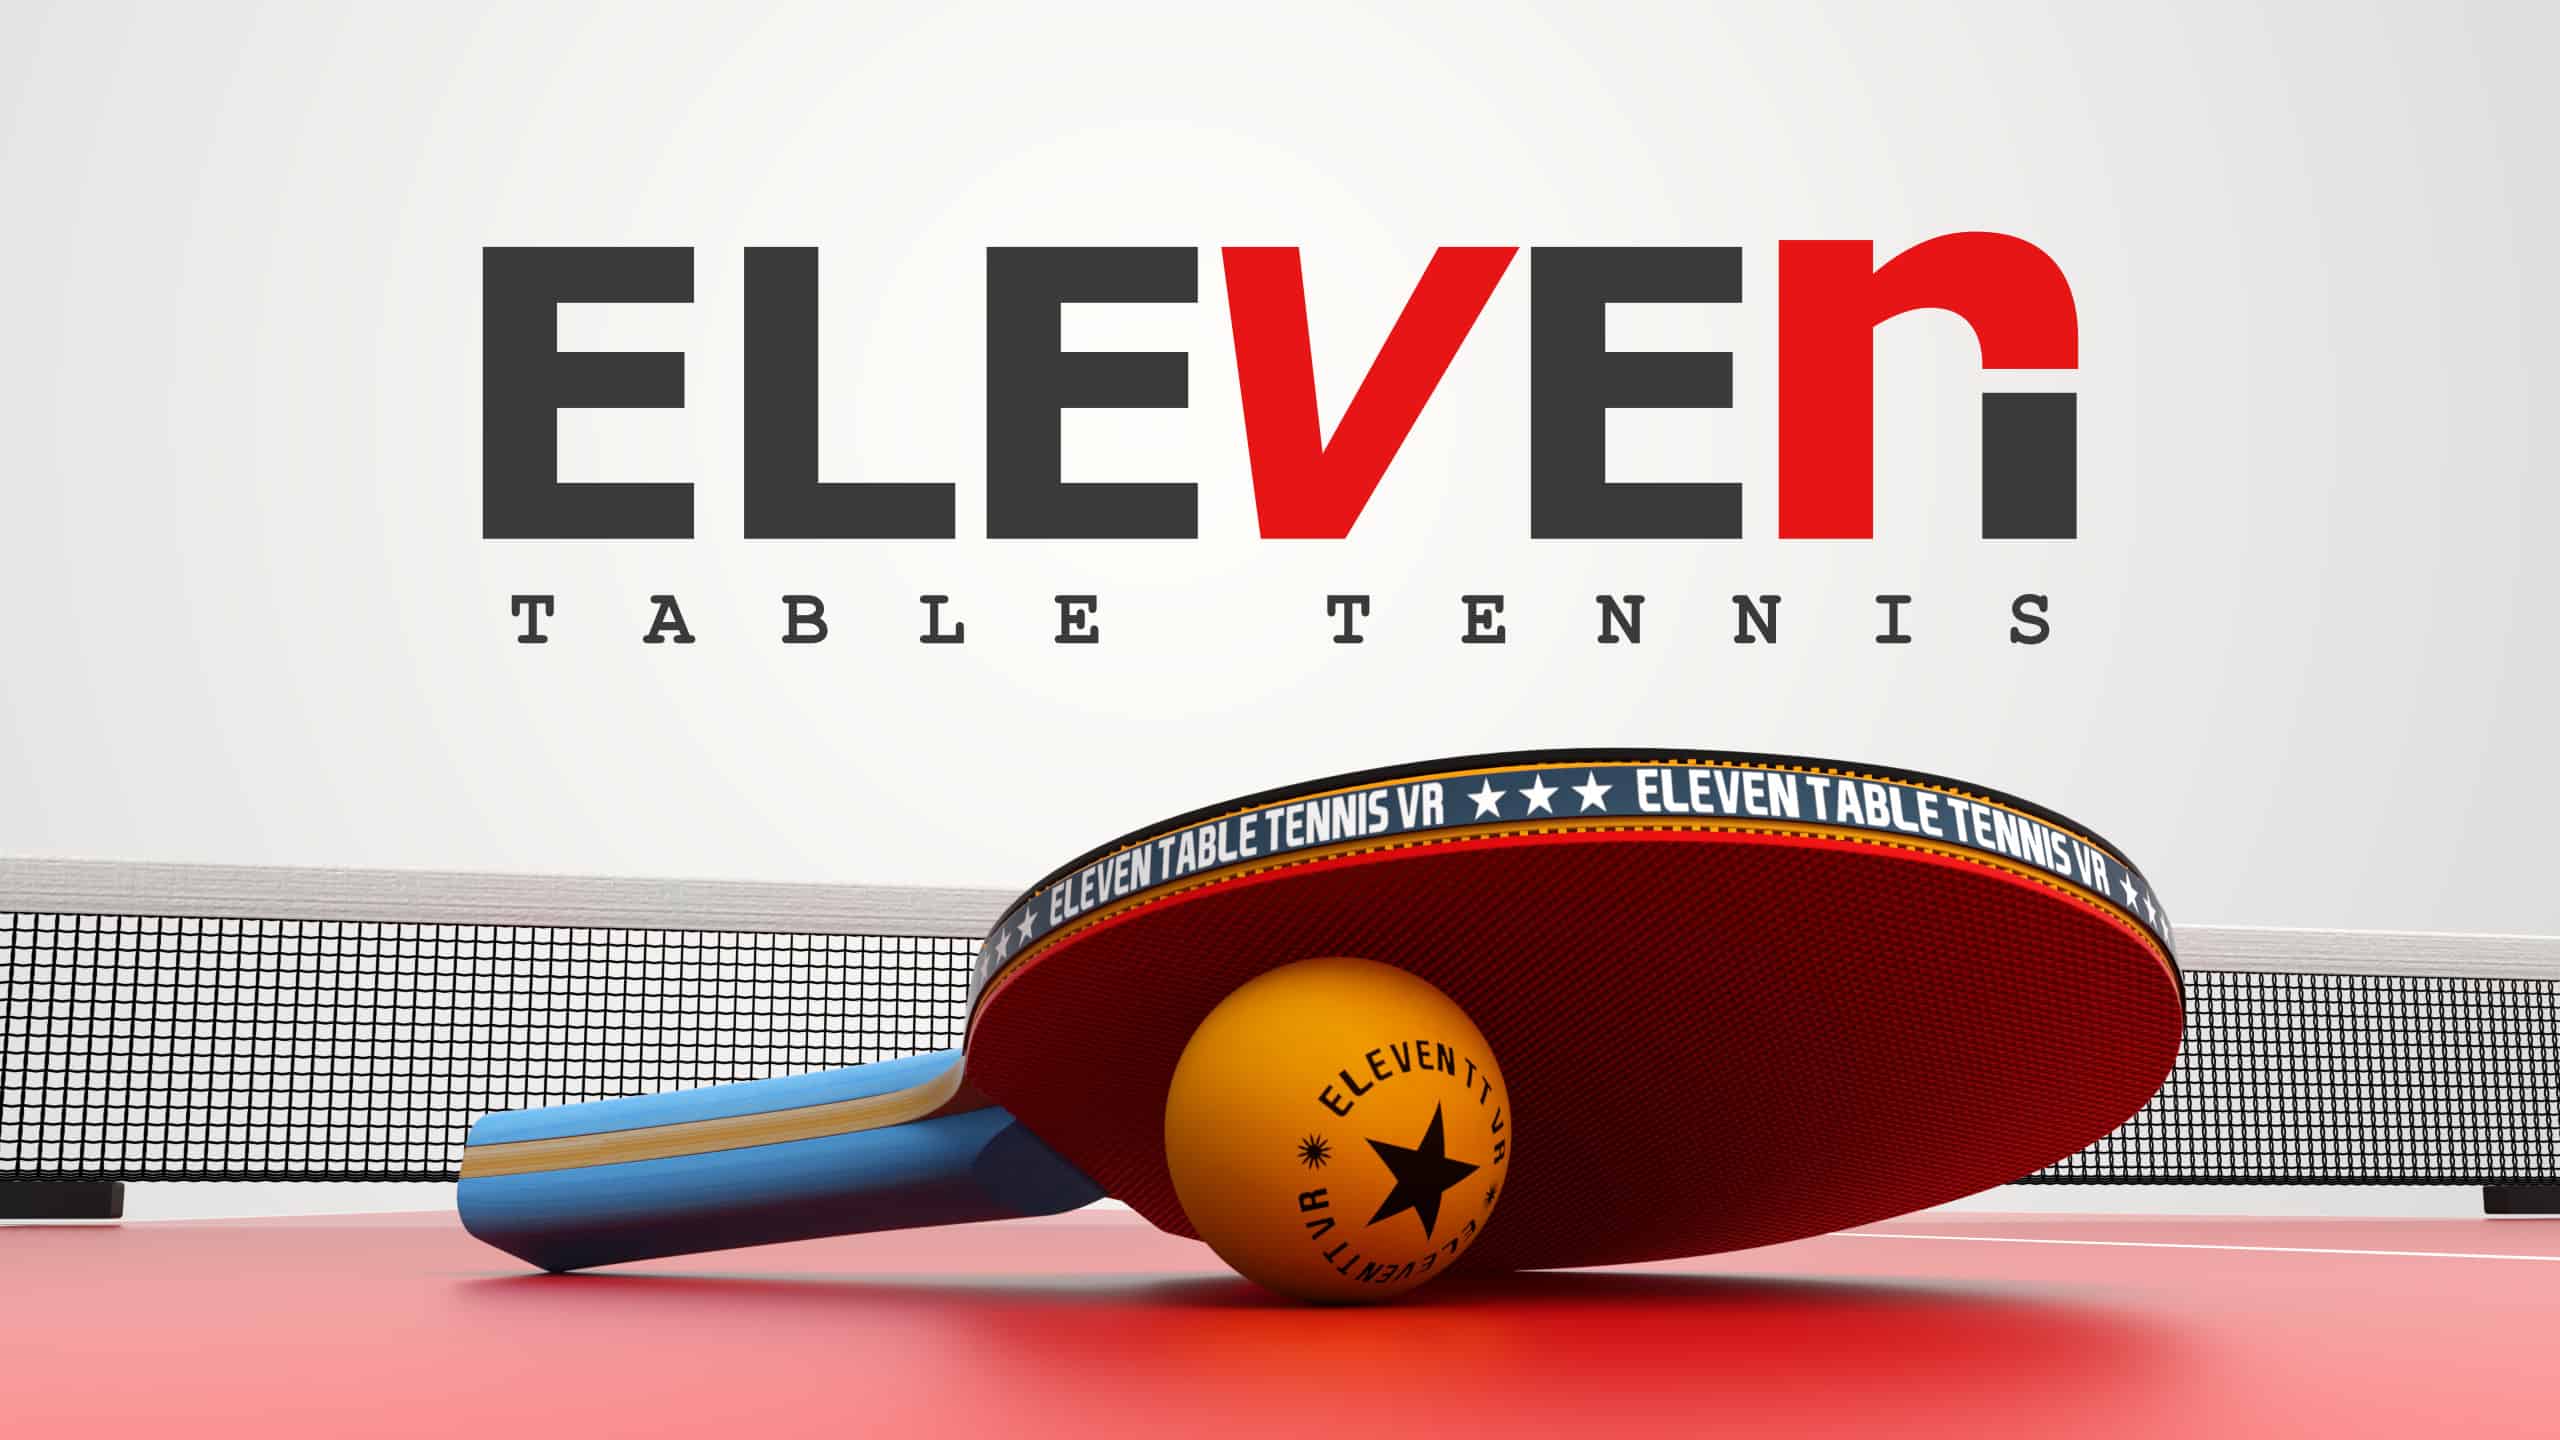 Eleven vr. VR Table Tennis. Eleven Table Tennis. Eleven Table Tennis VR. Eleven Table Tennis VR описание.